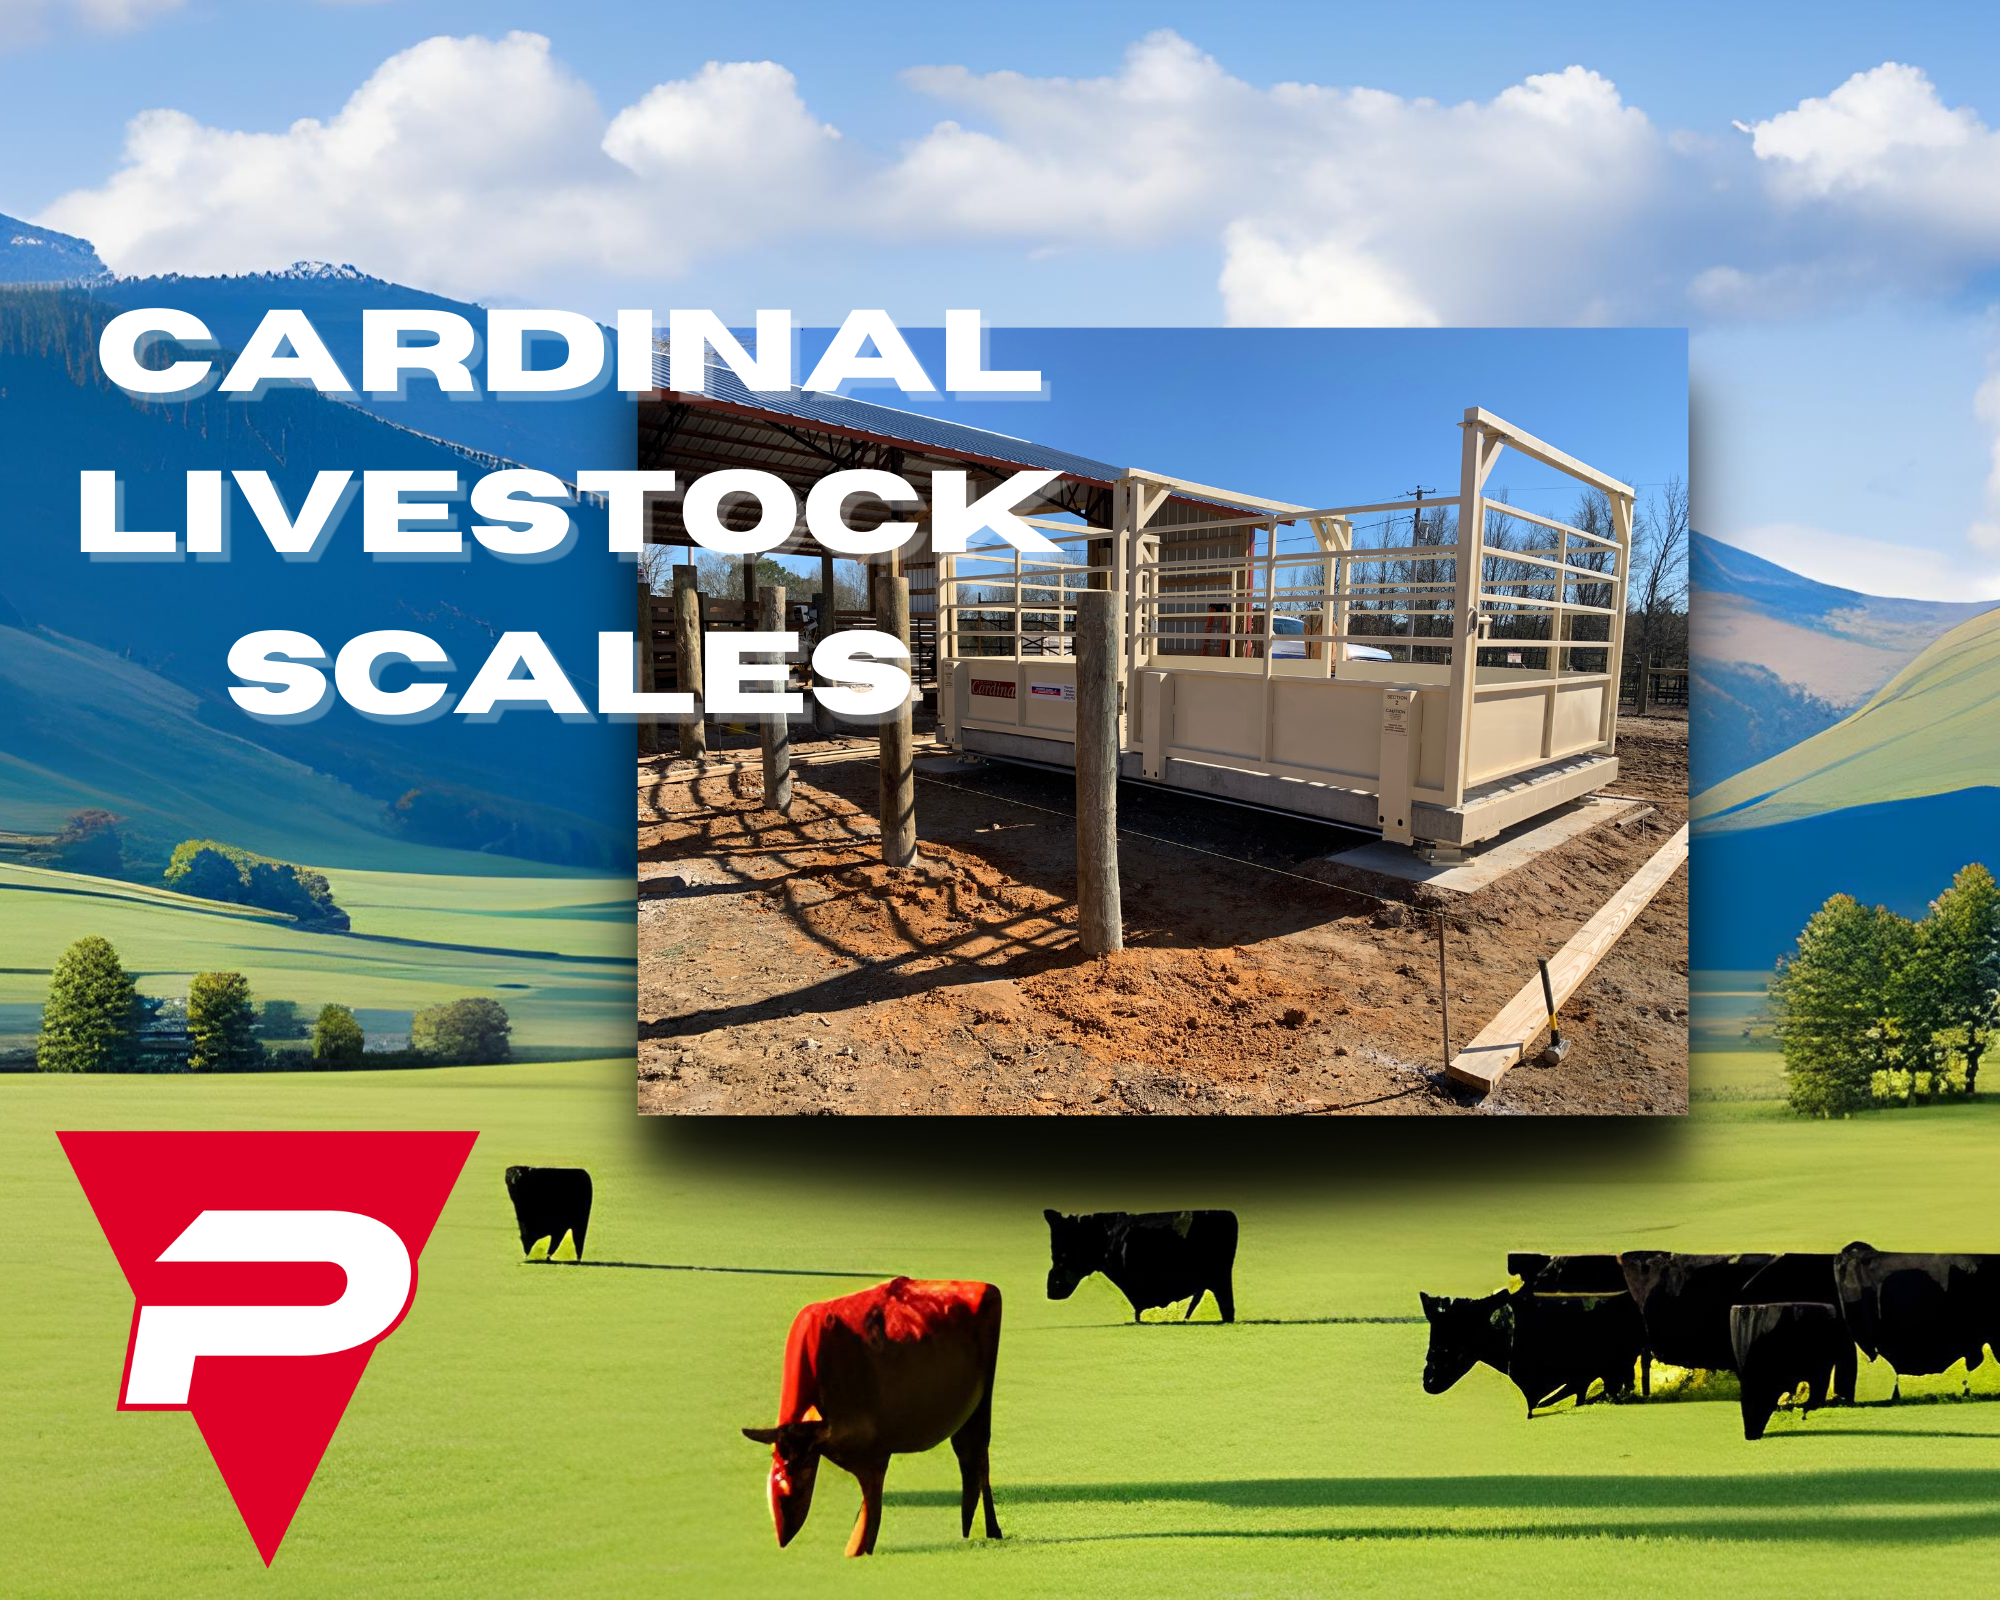 Made specifically for the farmer and rancher, Cardinal Scale’s livestock scales provide innovative solutions for a wide variety of animal weighing needs. Cardinal Scale’s Harvester, LS, and LSE models are made to weigh multiple head of cattle in stockyards, feed lots, and private farms.